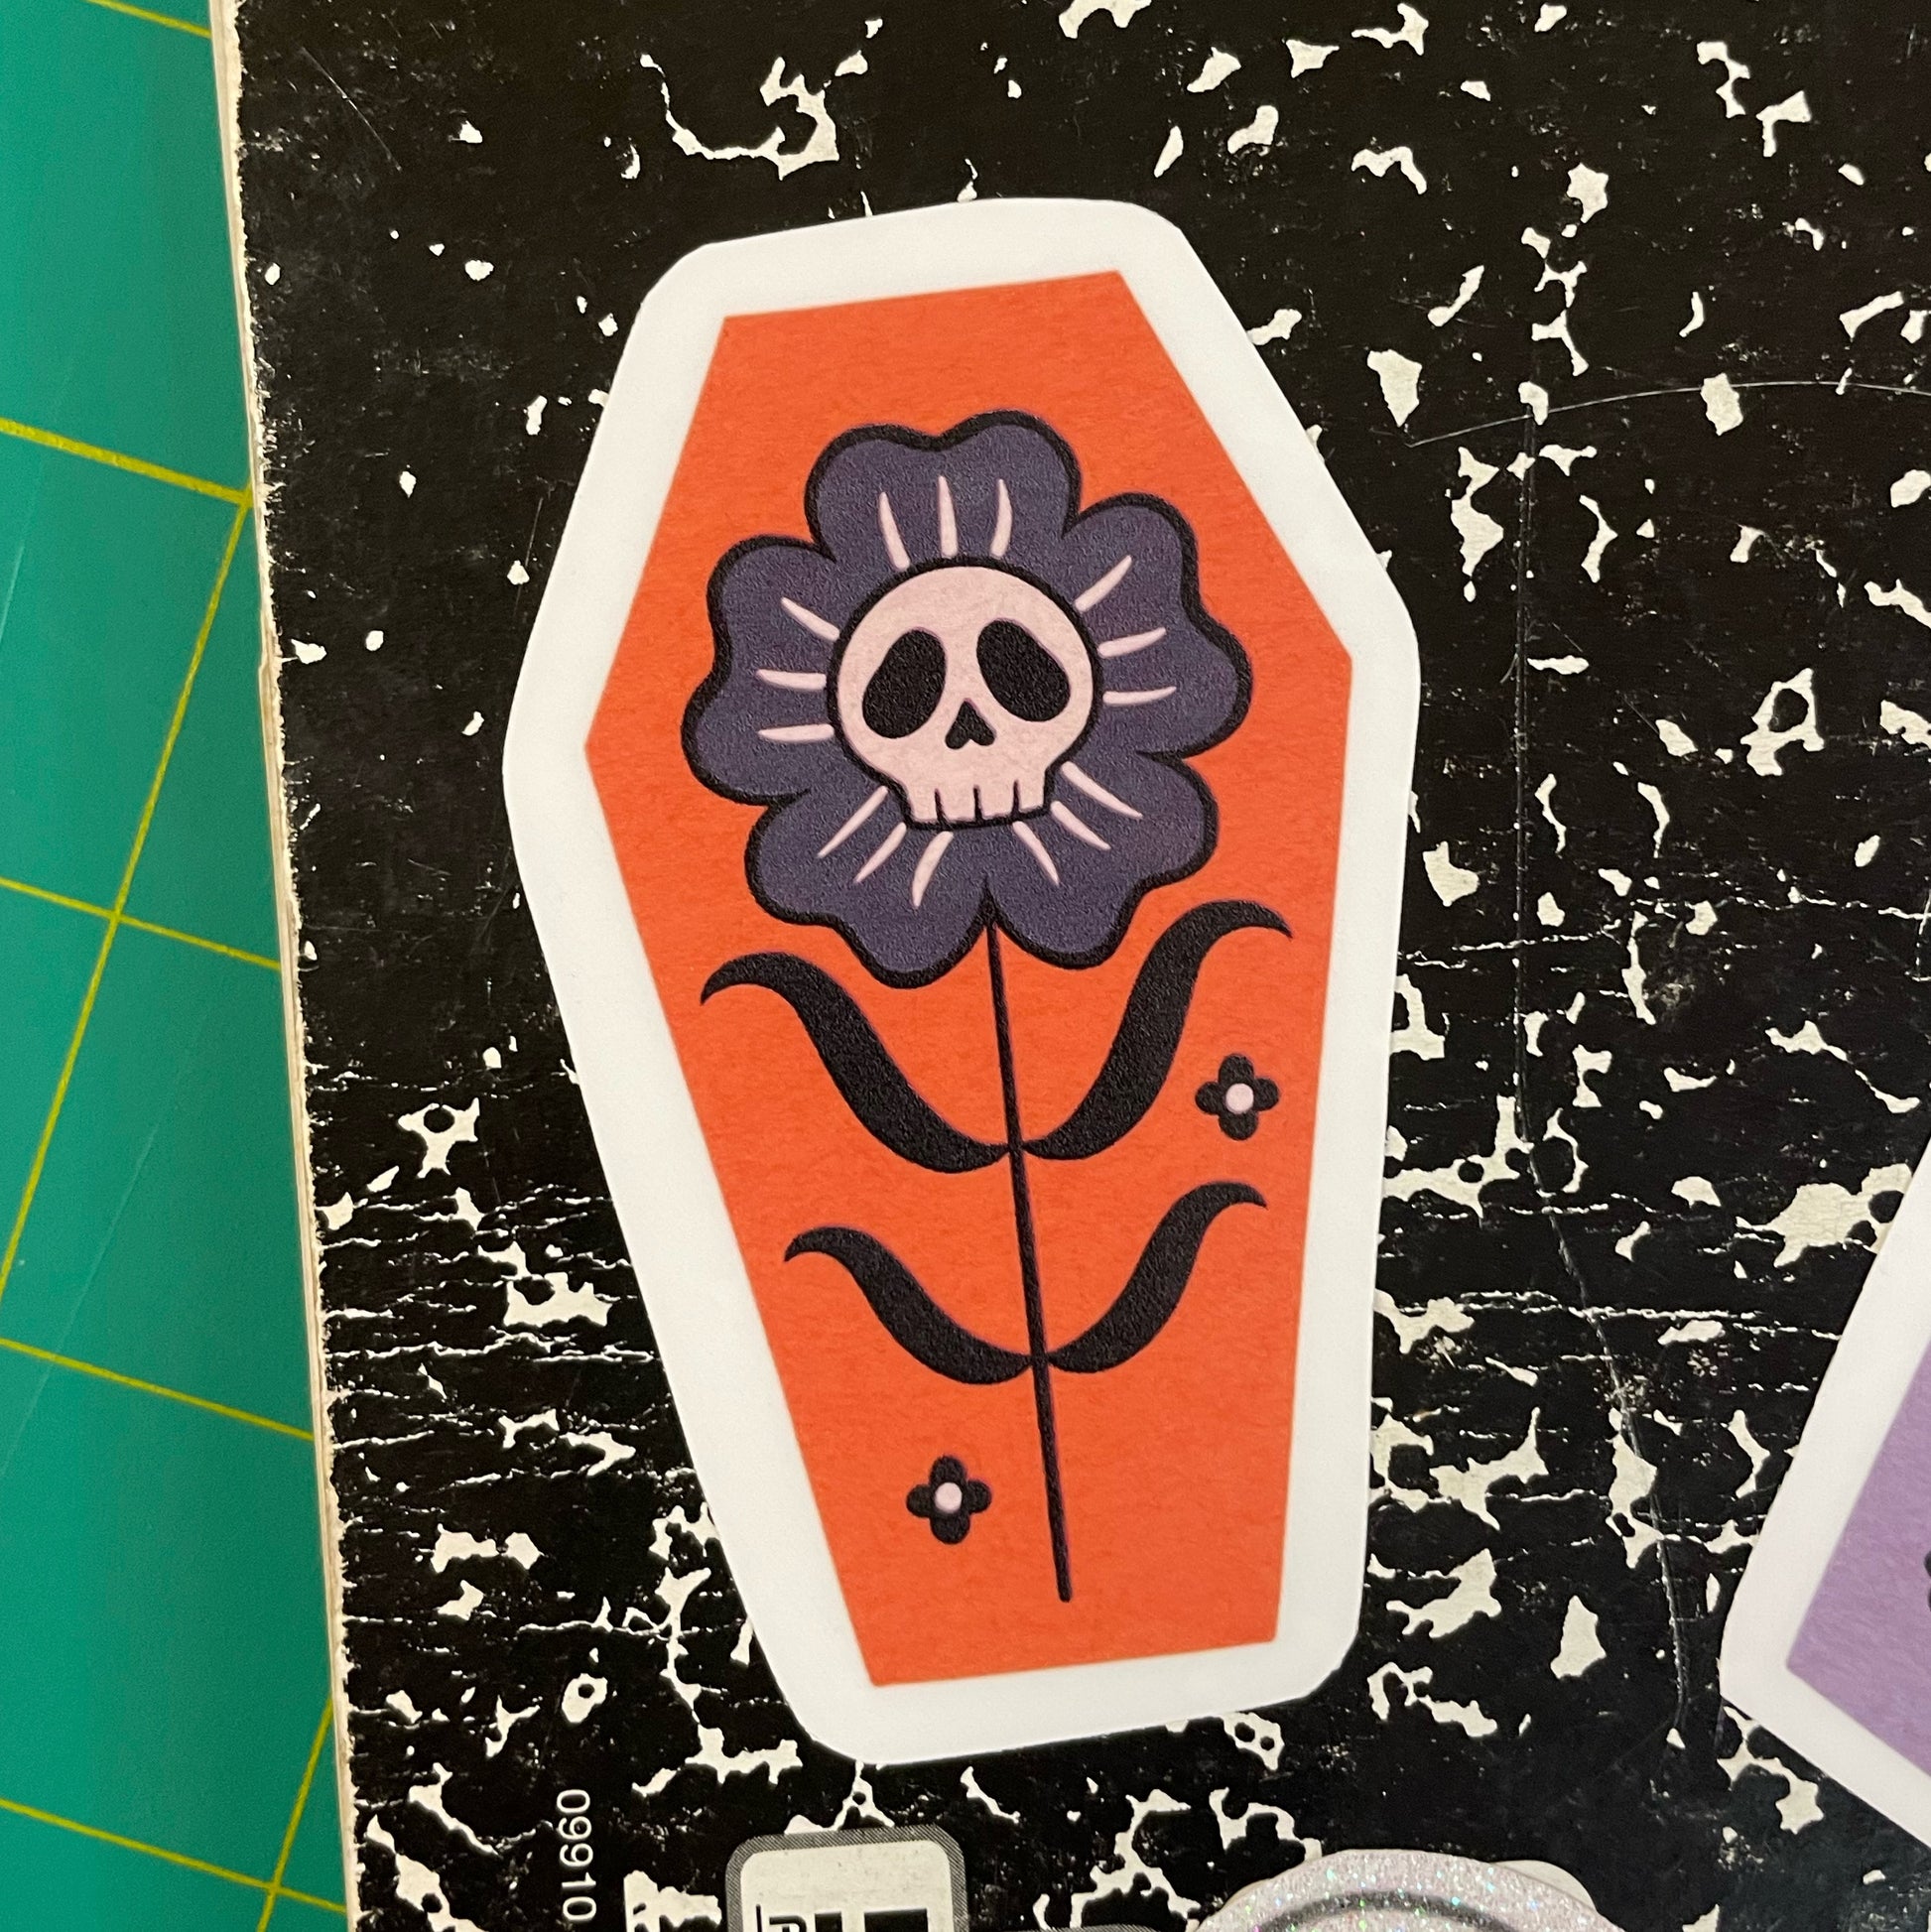 A coffin shaped sticker with an orange background, featuring a black and gray flower with a skull in the center.